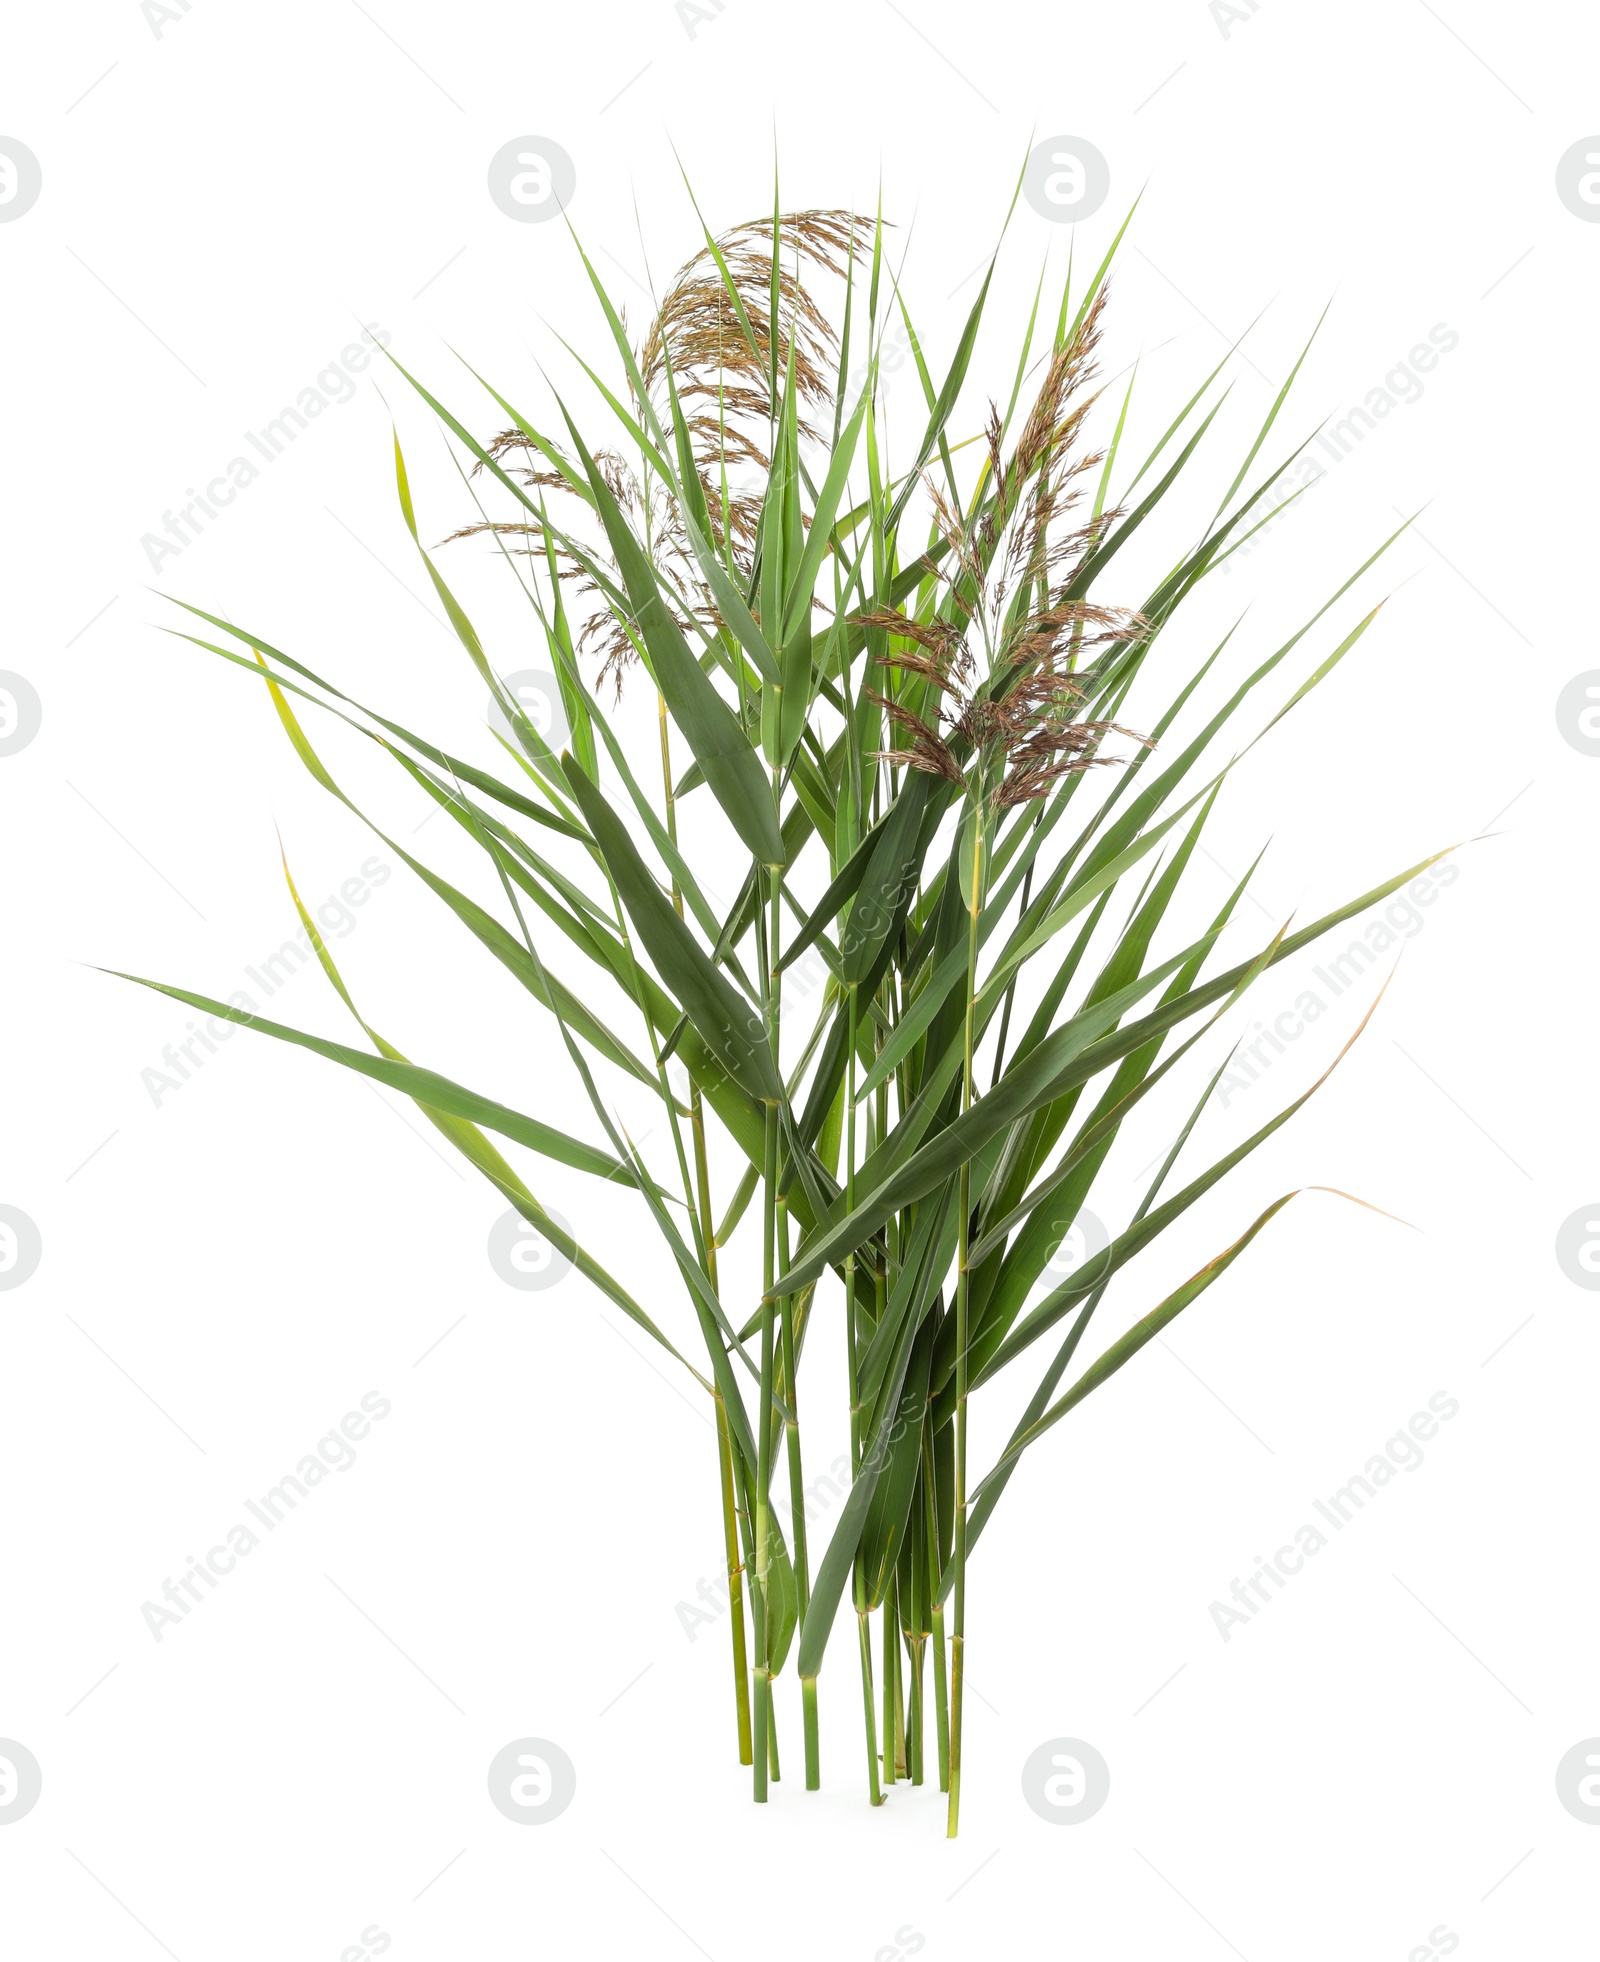 Photo of Beautiful reeds with lush green leaves and seed heads on white background